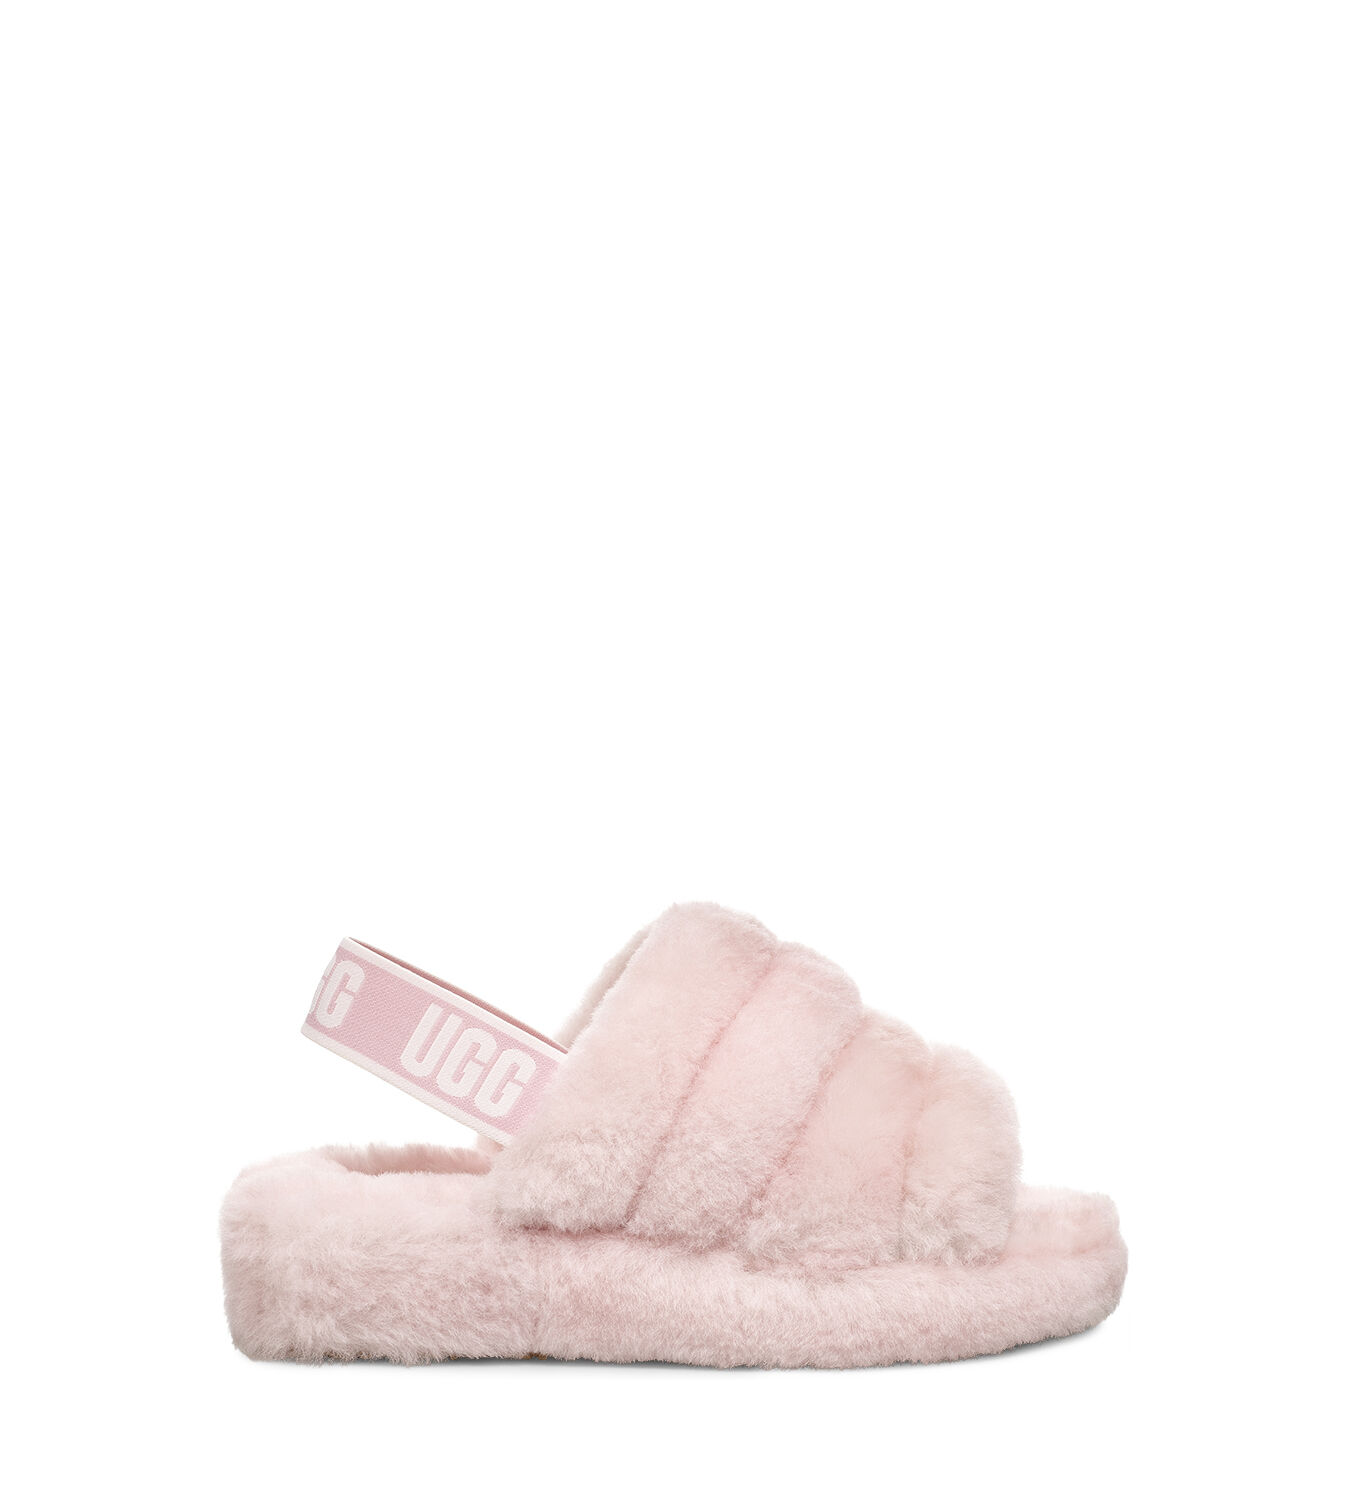 cheap uggs slippers